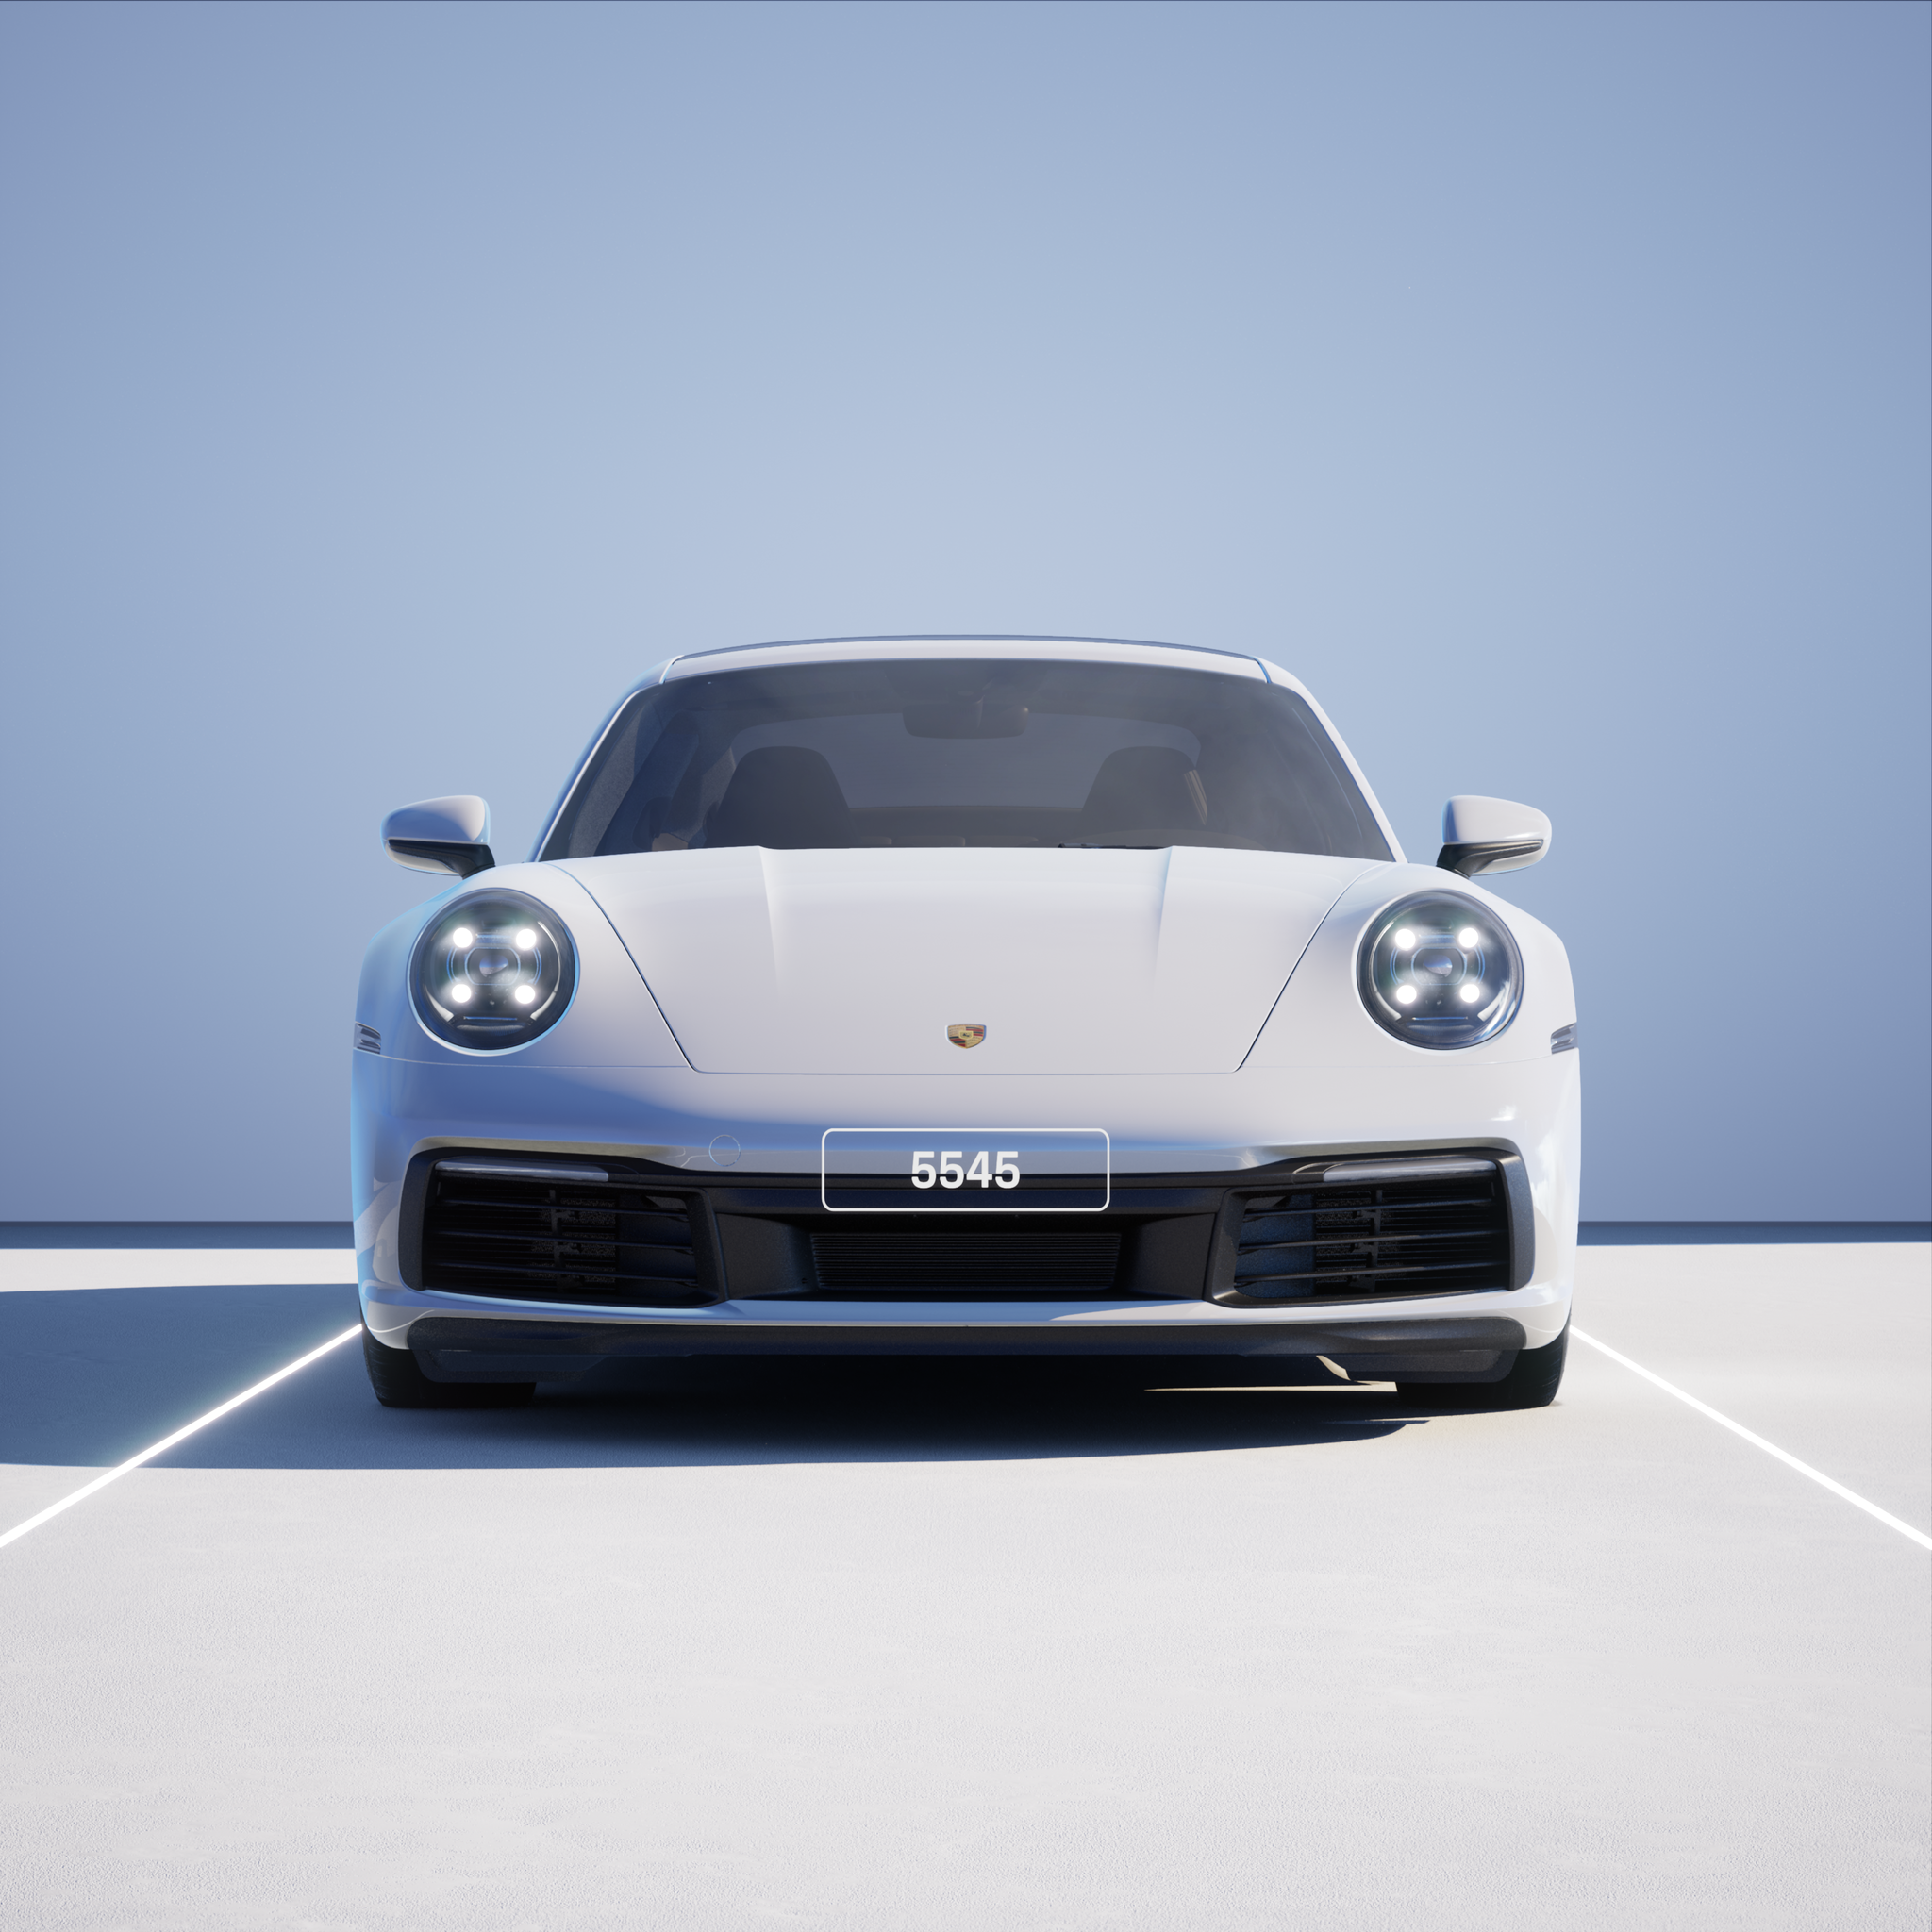 The PORSCHΞ 911 5545 image in phase